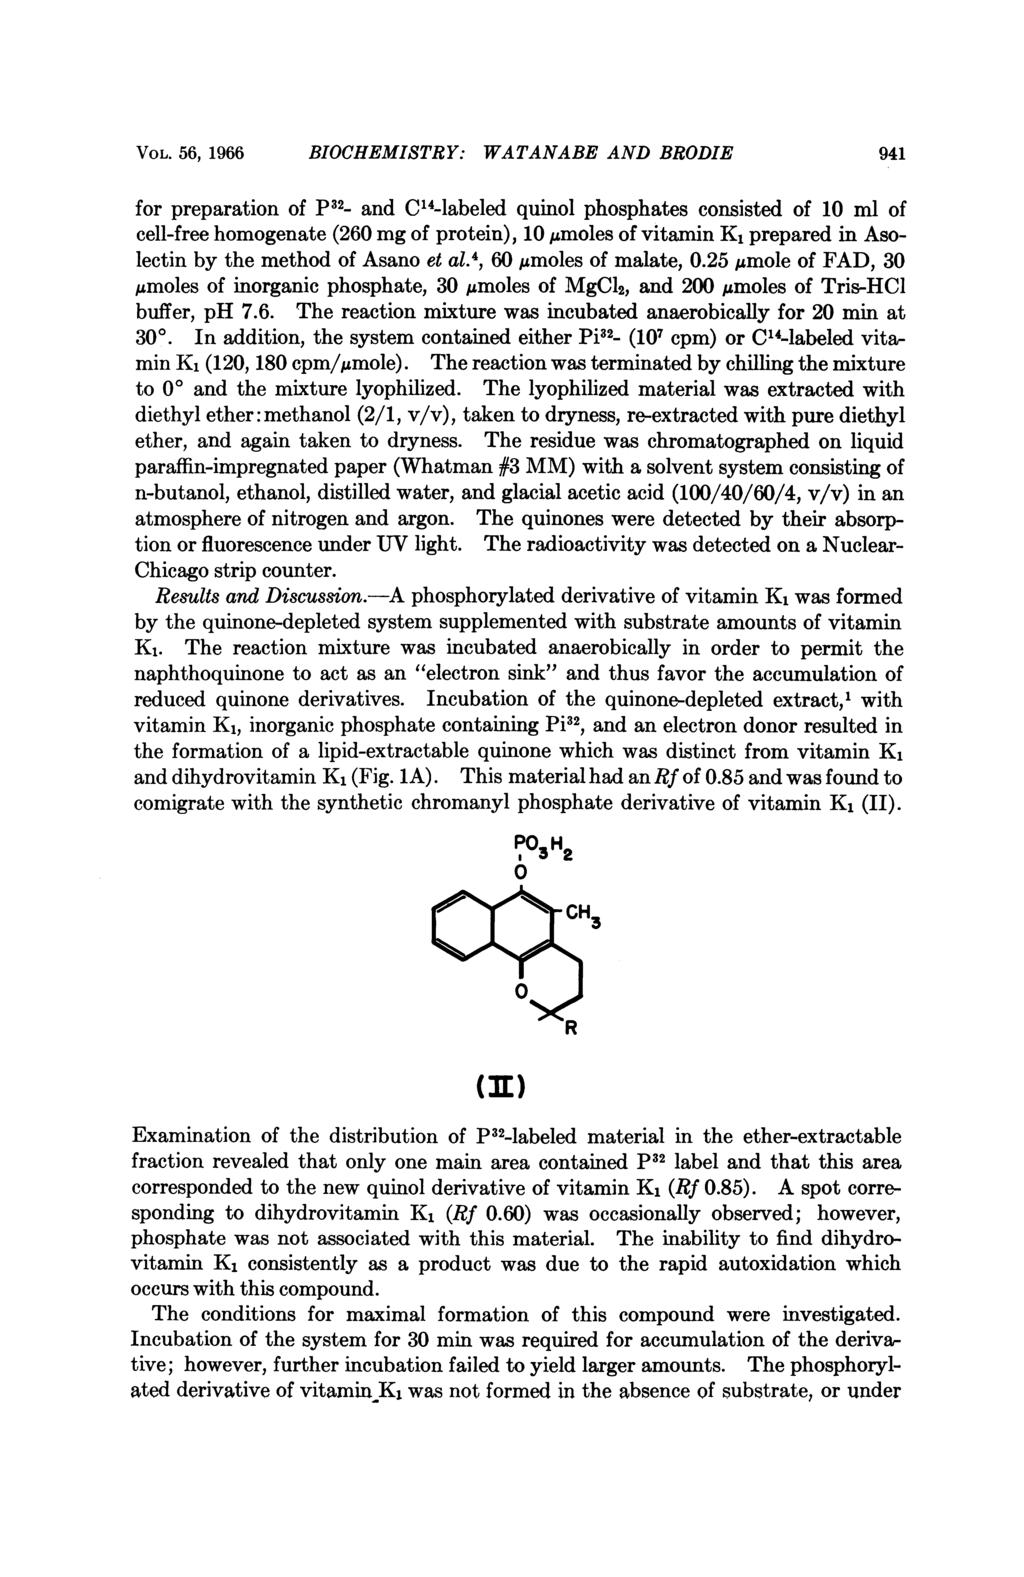 VOL. 56, 1966 BIOCHEMISTRY: WATANABE AND BRODIE 941 for preparation of p32_ and C14-labeled quinol phosphates consisted of 10 ml of cell-free homogenate (260 mg of protein), 10 Mumoles of vitamin K1